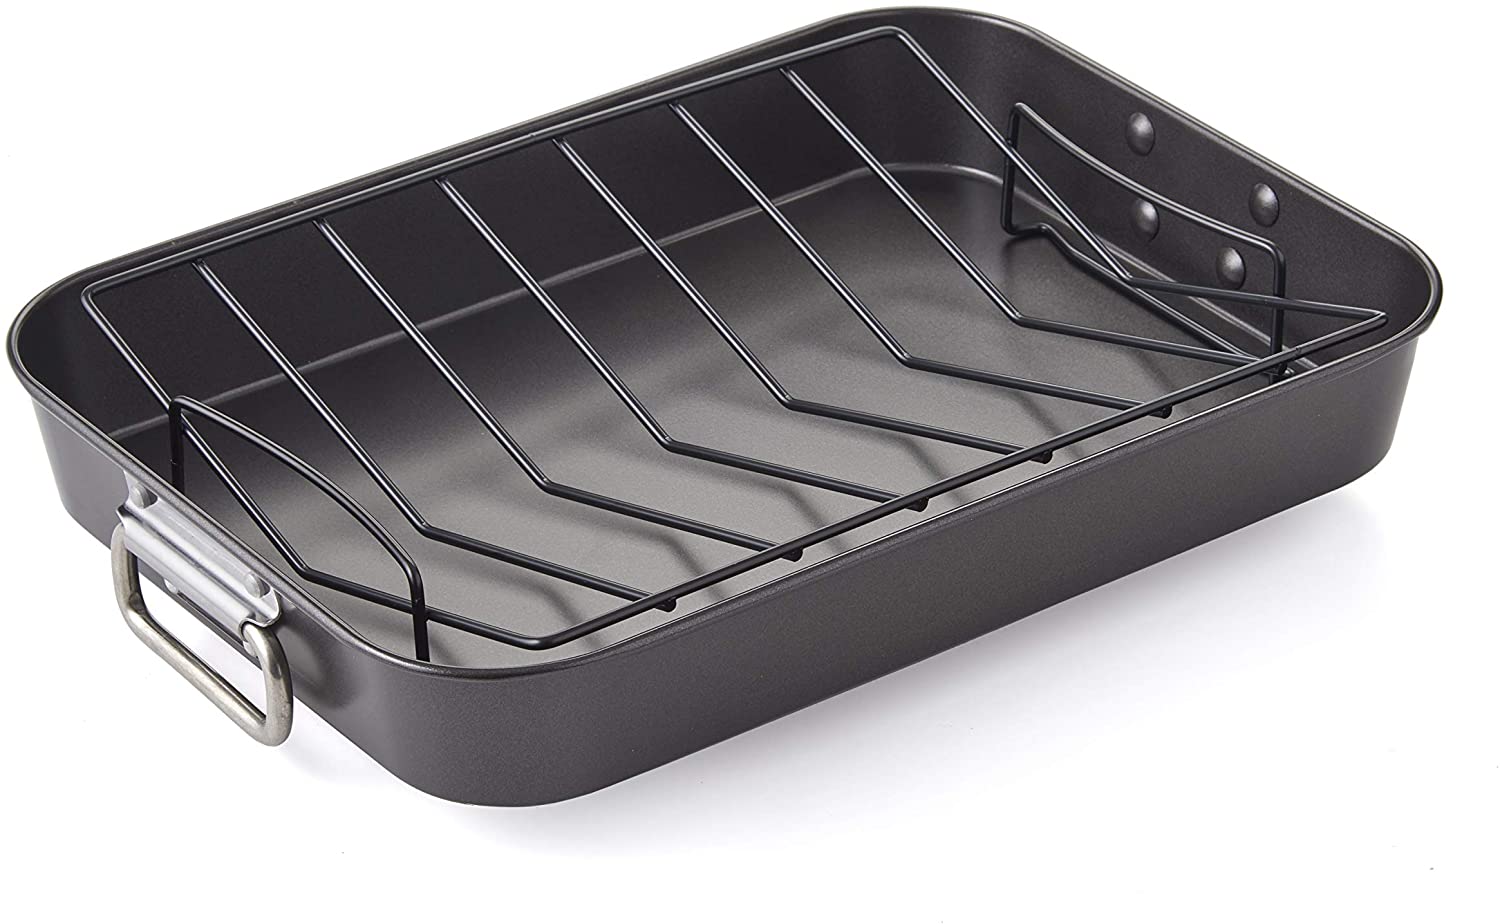 Nifty 3-Tier Oven Rack – Non-Stick, Dishwasher Safe, Use for Cooking  Casseroles, Compact Collapsible Kitchen Storage, Chrome-Plated Steel  Construction